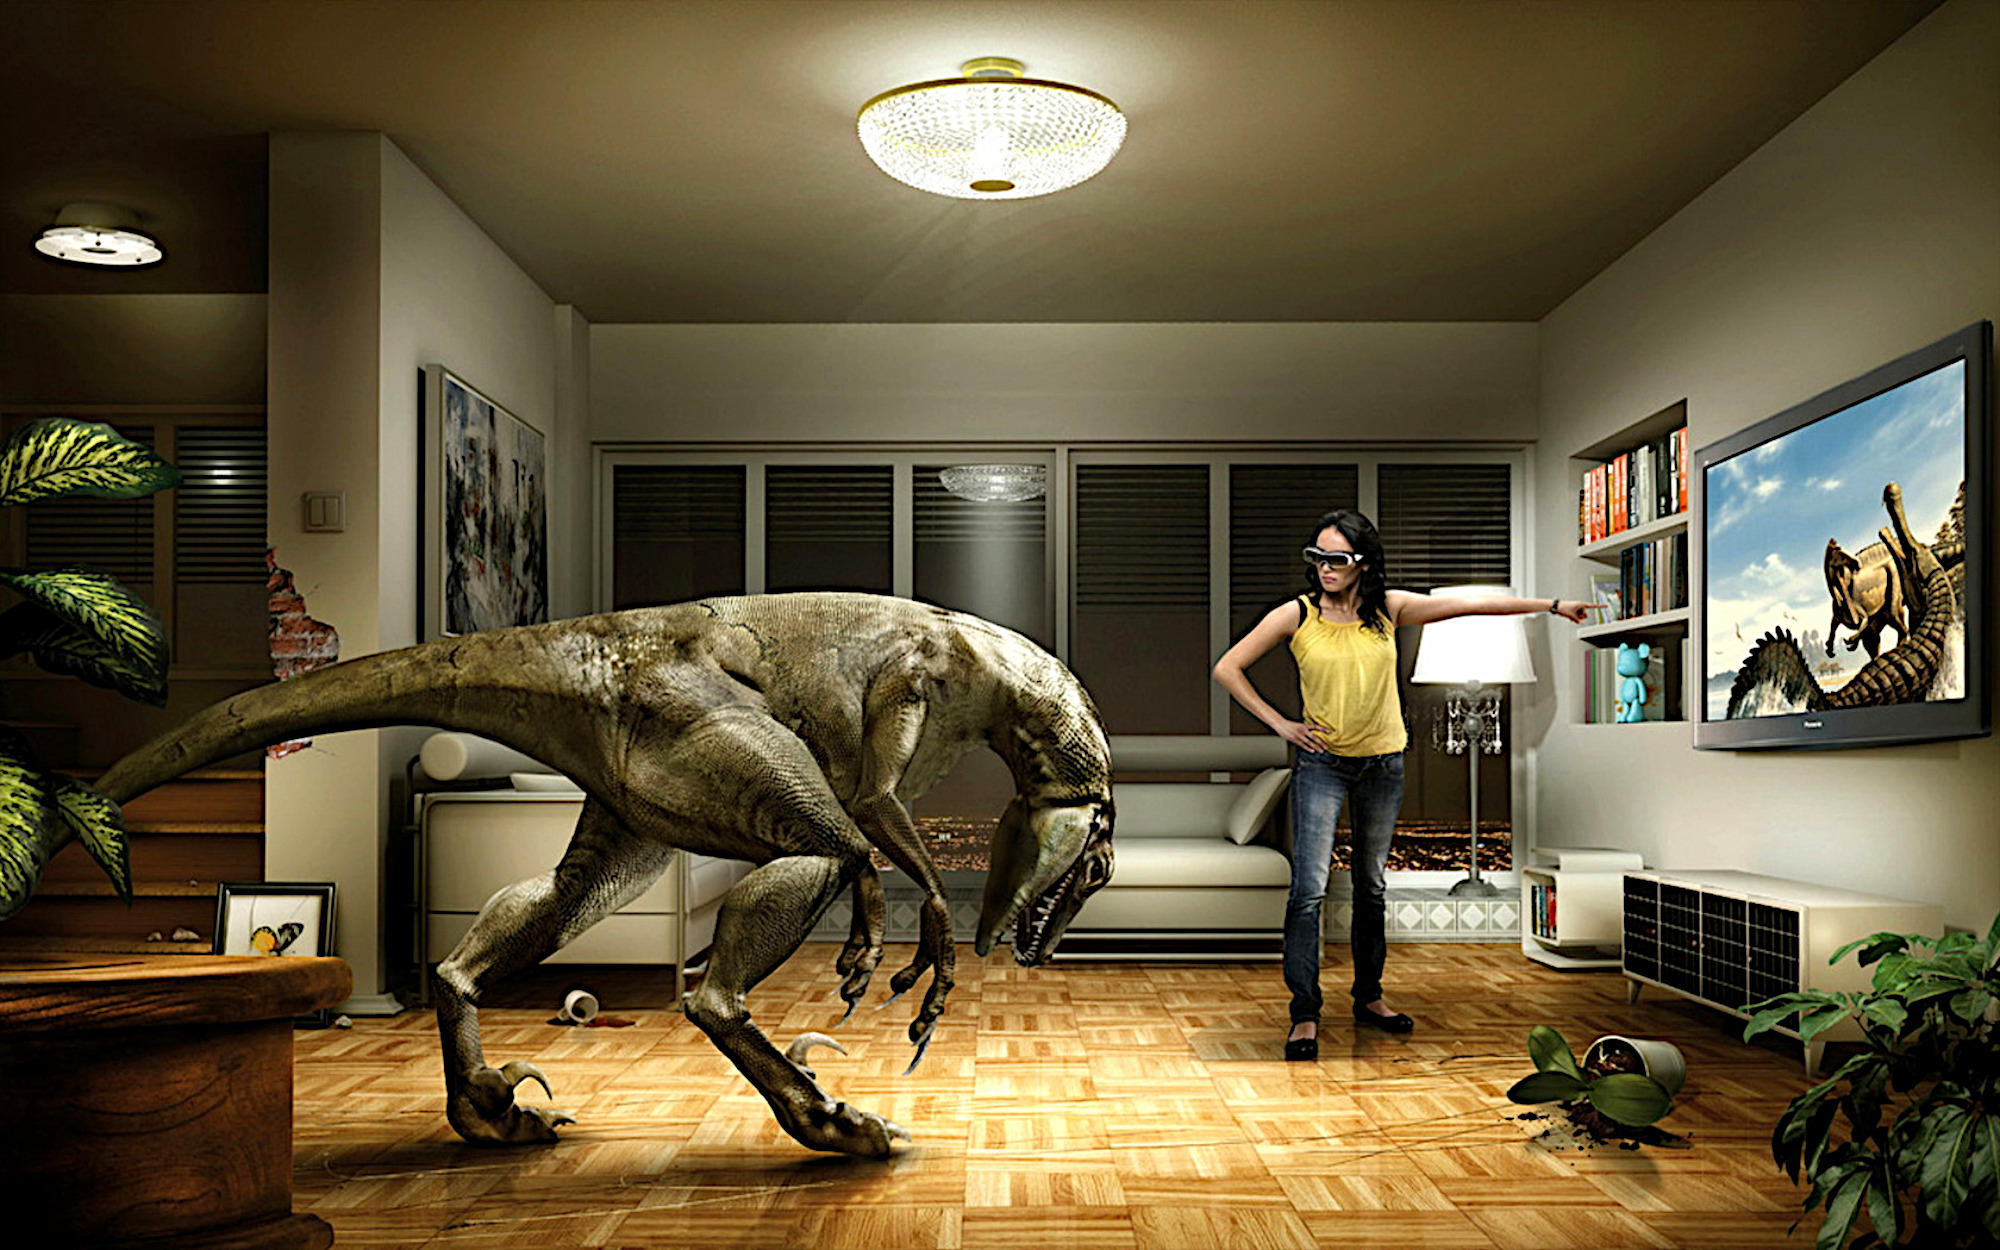 Wallpapers dinosaur interior the situation on the desktop